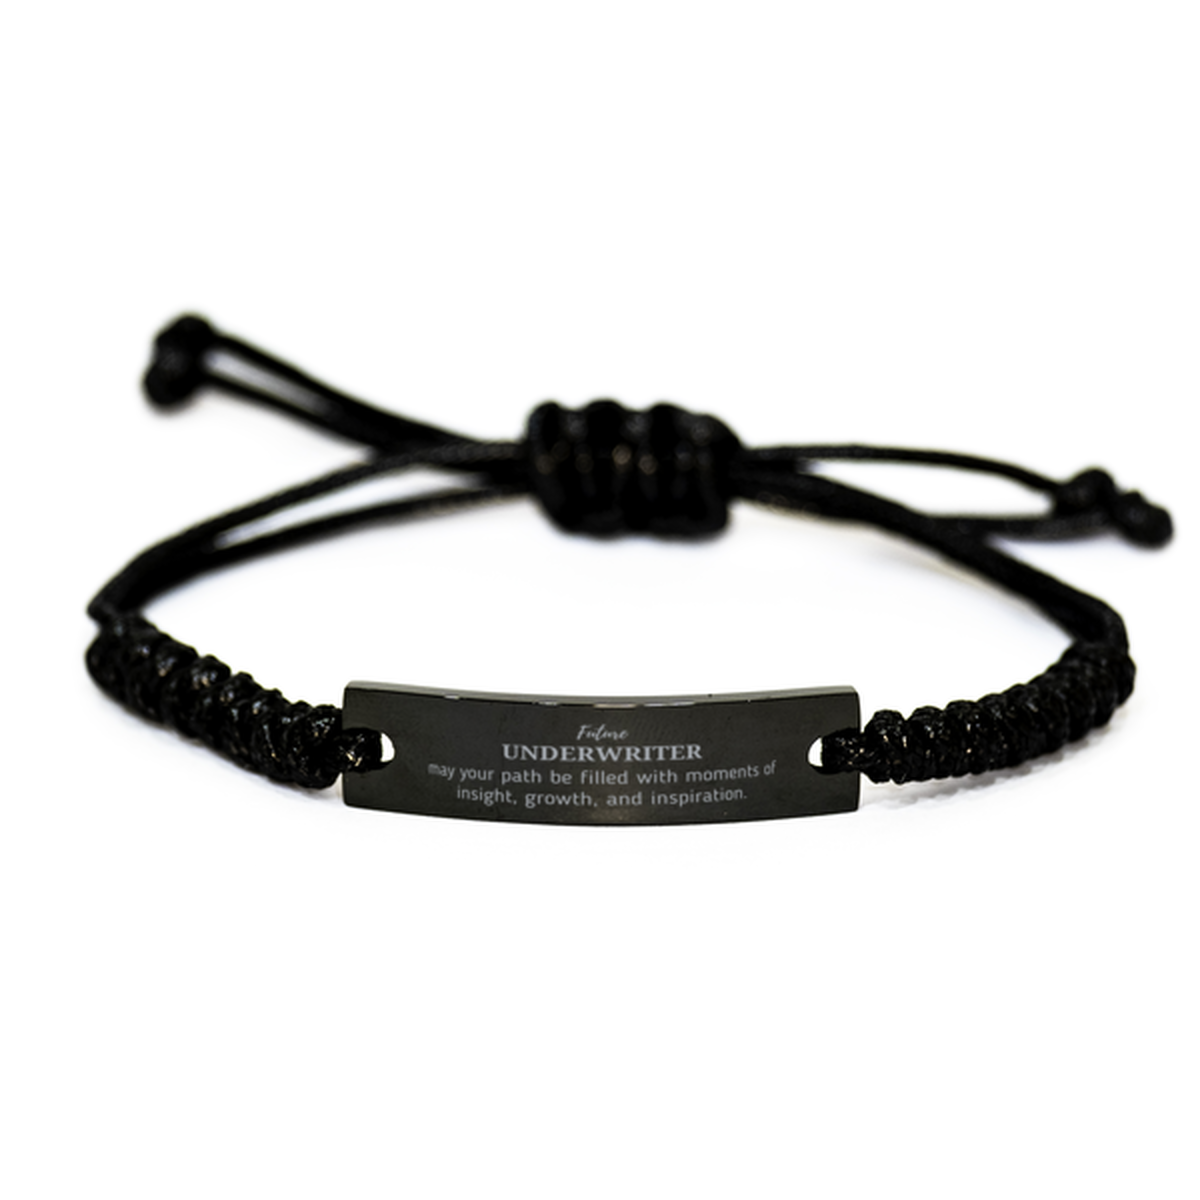 Future Underwriter Gifts, May your path be filled with moments of insight, Graduation Gifts for New Underwriter, Christmas Unique Black Rope Bracelet For Men, Women, Friends